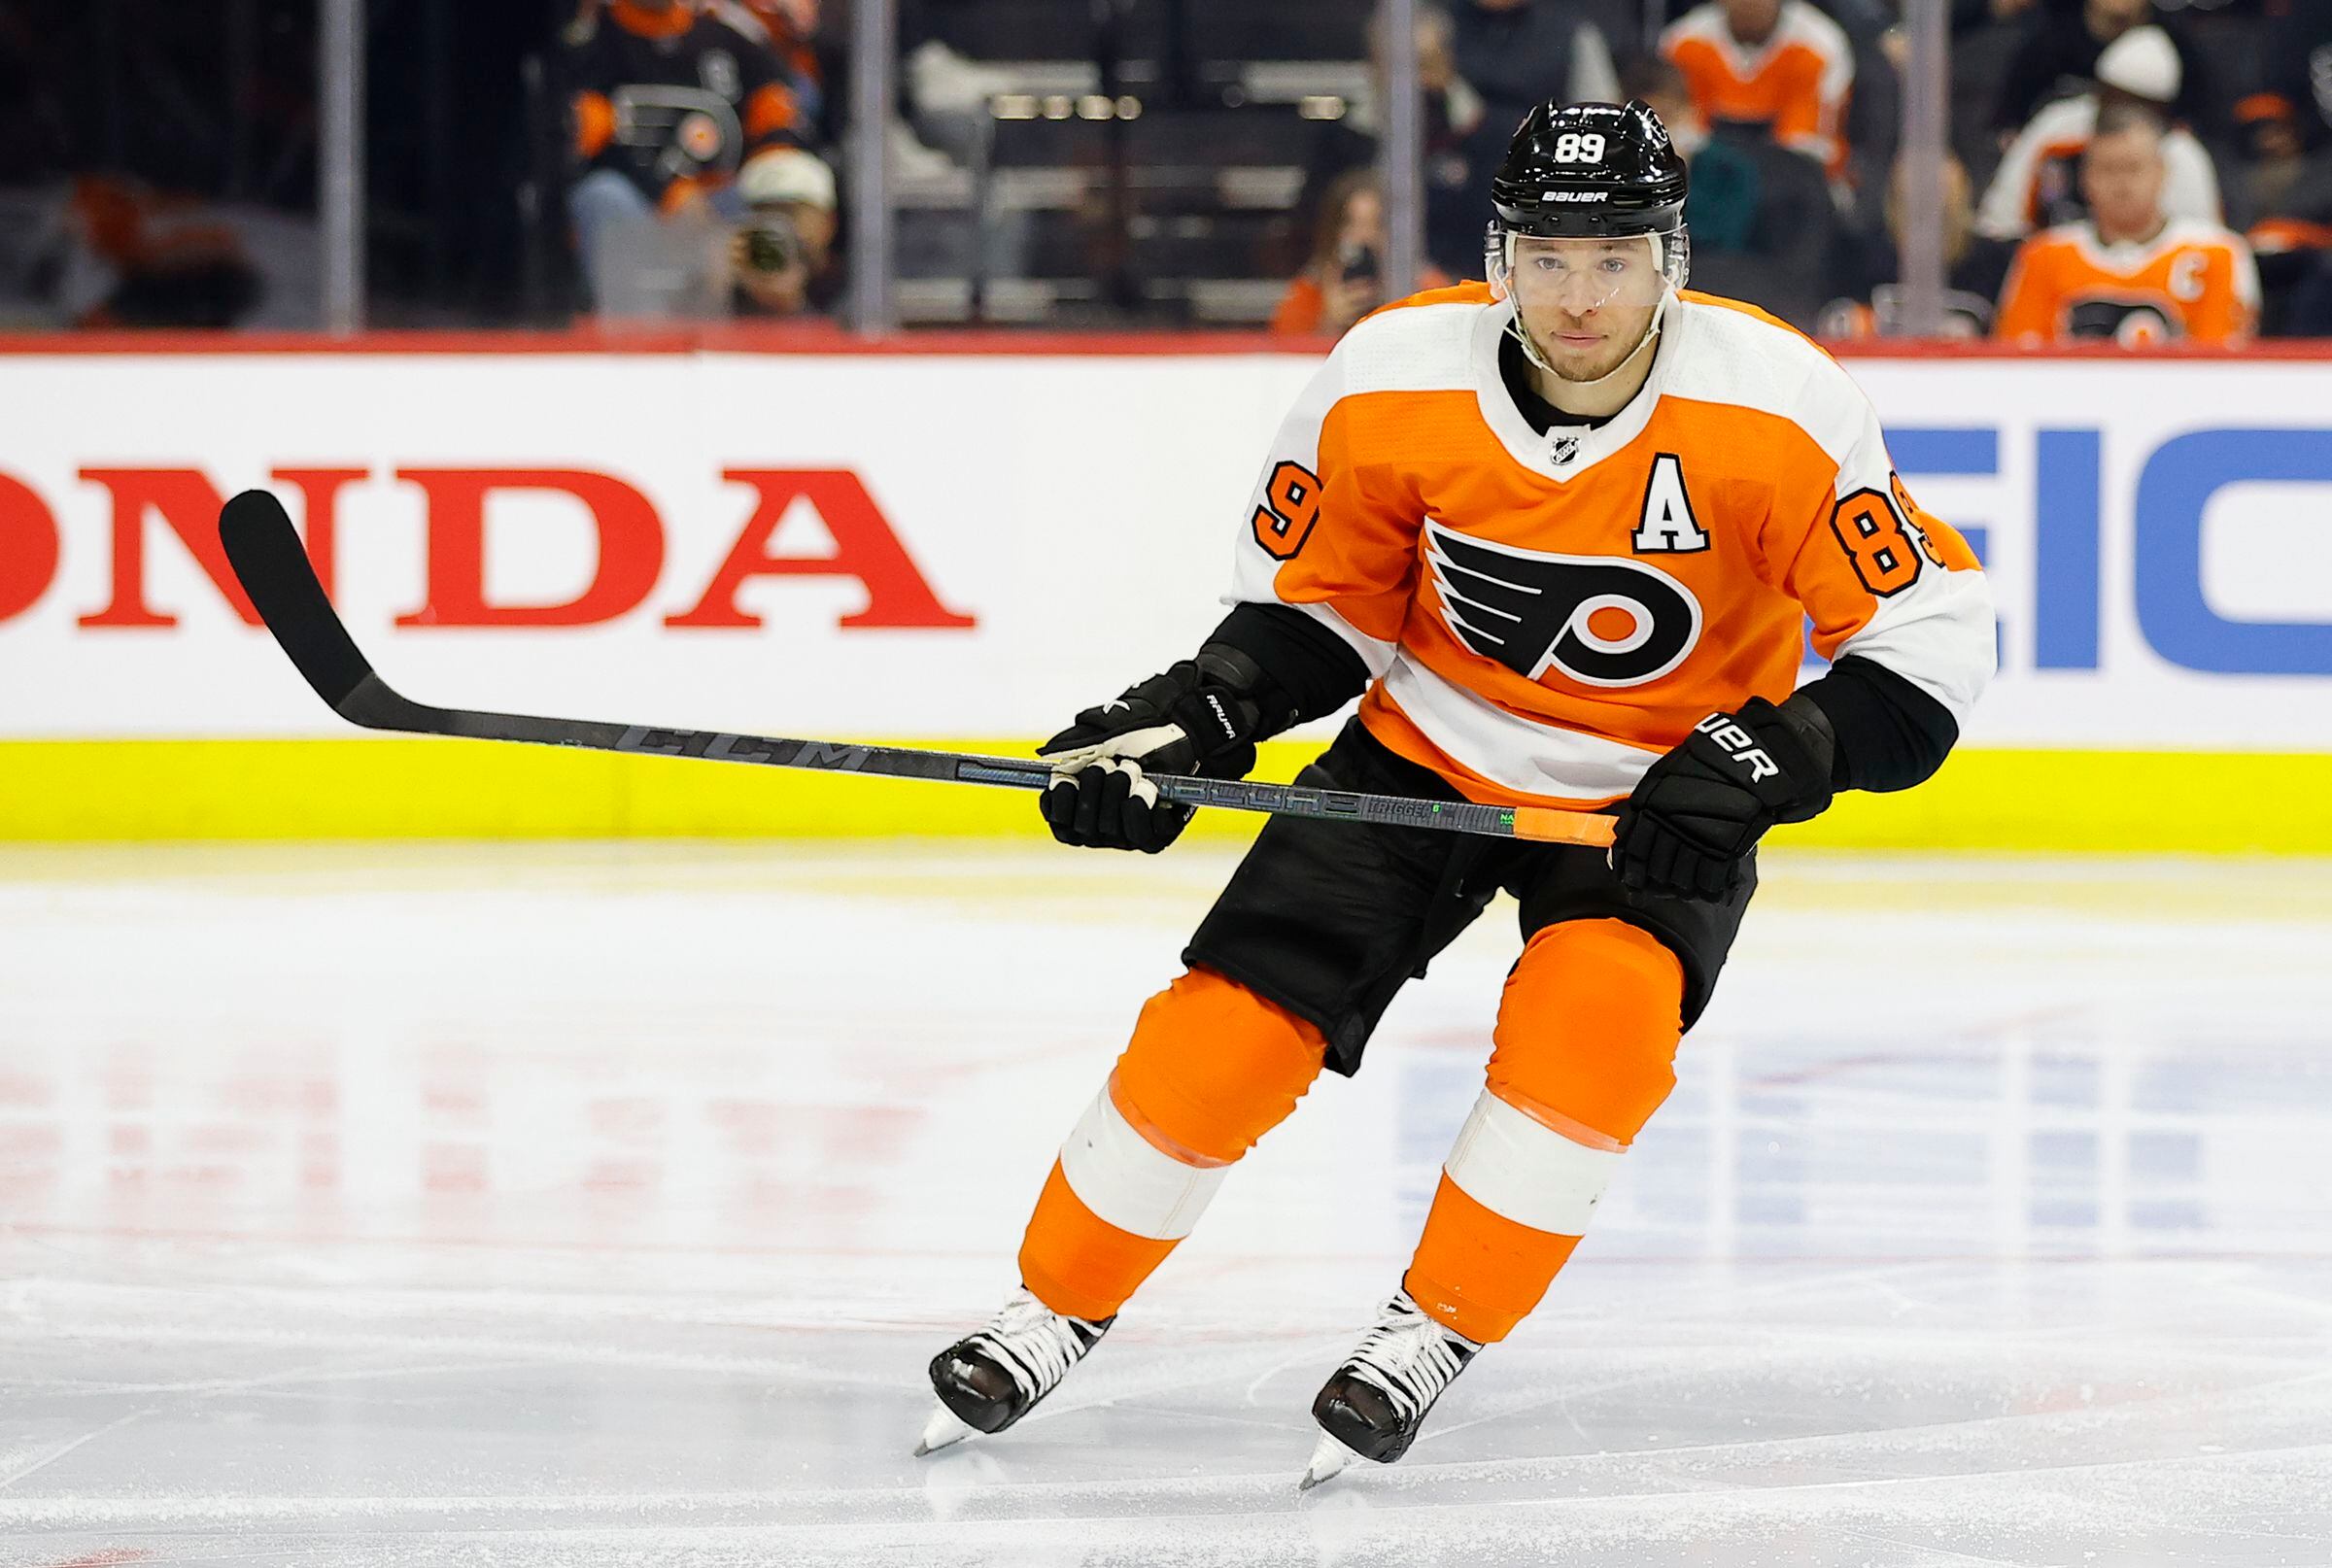 Couturier, Atkinson 'Ready to Go' for Upcoming Flyers Season